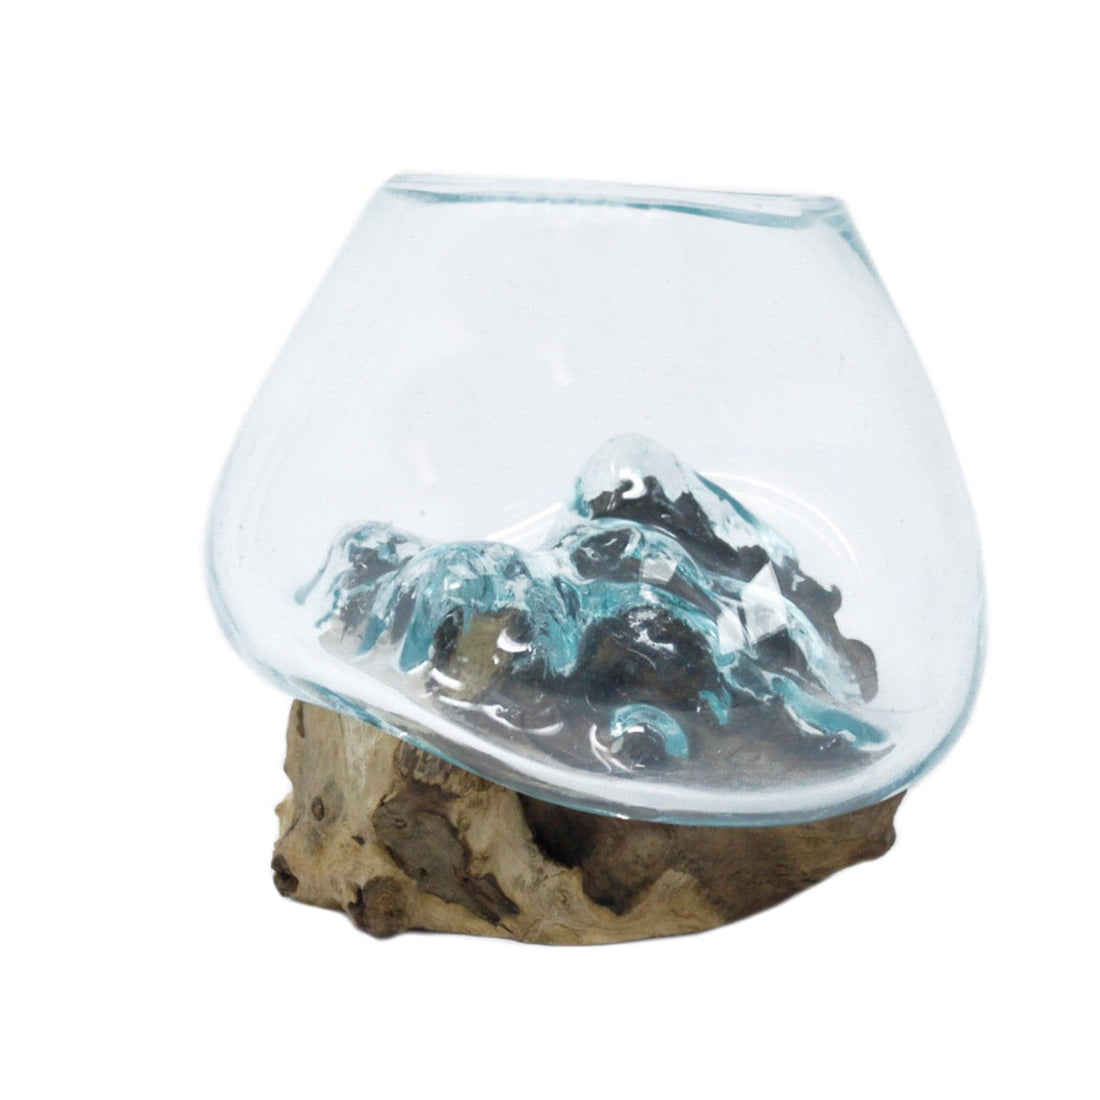 Molten Glass on Wood - Small Bowl - best price from Maltashopper.com MGW-01